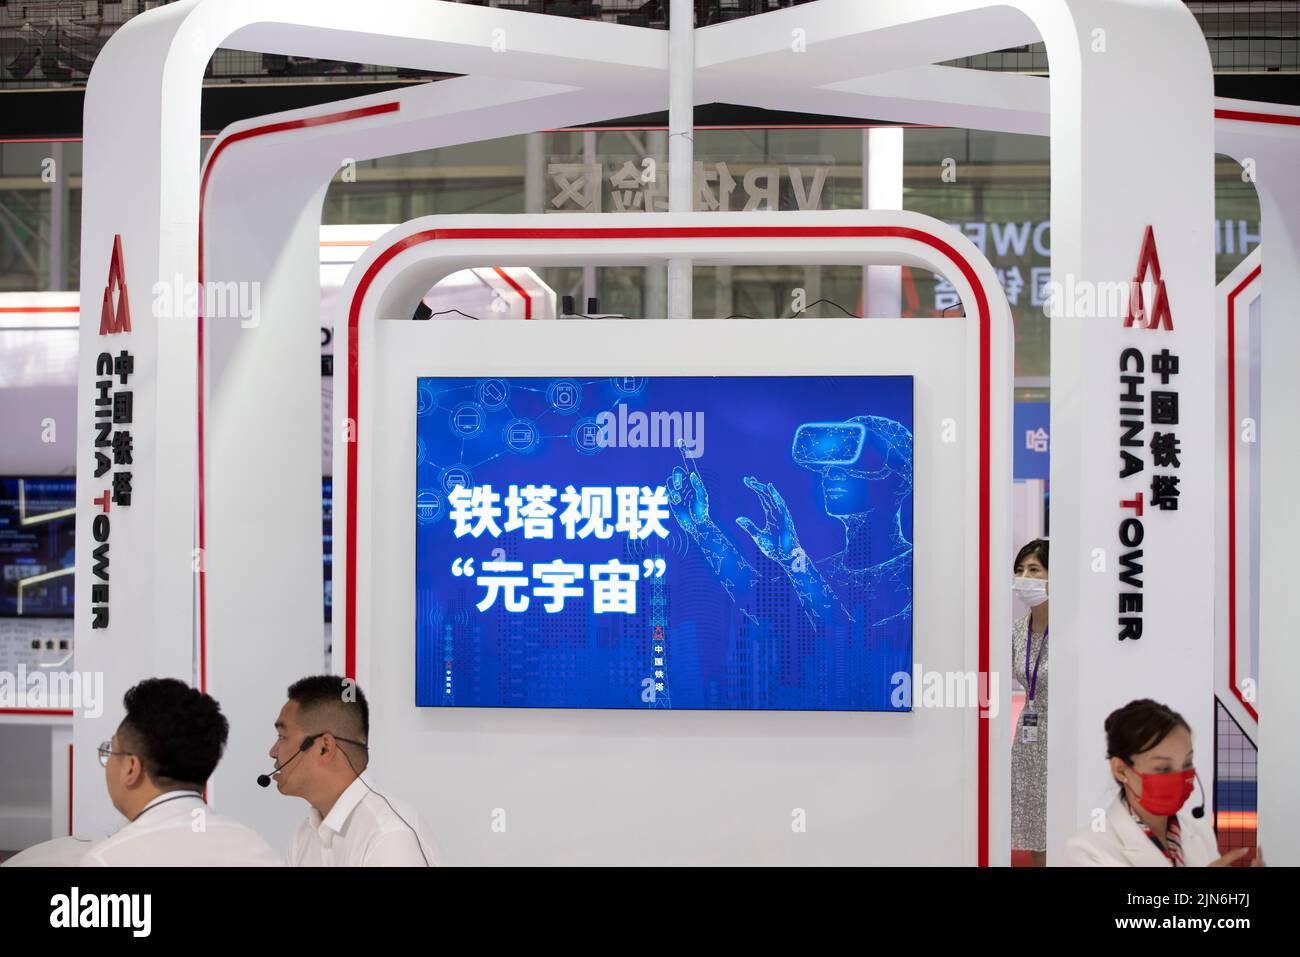 (220809) -- HARBIN, Aug. 9, 2022 (Xinhua) -- Staff members arrange an exhibition booth during a media preview of the 2022 World 5G Convention in Harbin, capital of northeast China's Heilongjiang Province, Aug. 9, 2022. The 2022 World 5G Convention will be held here from August 10 to 12. (Xinhua/Zhang Tao) Stock Photo